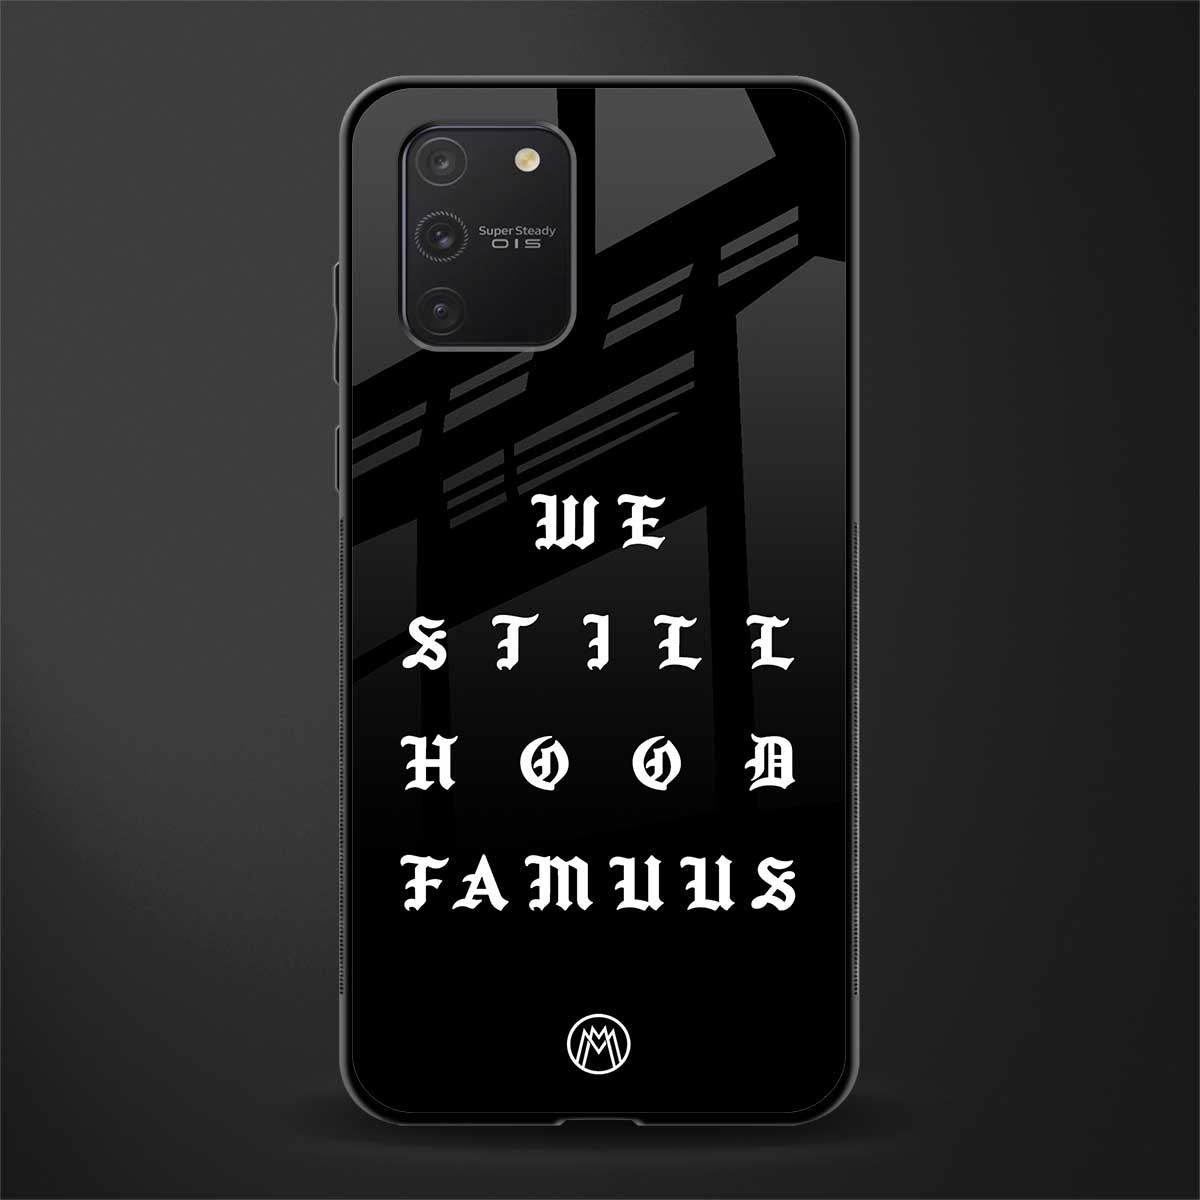 hood famous phone cover for samsung galaxy s10 lite